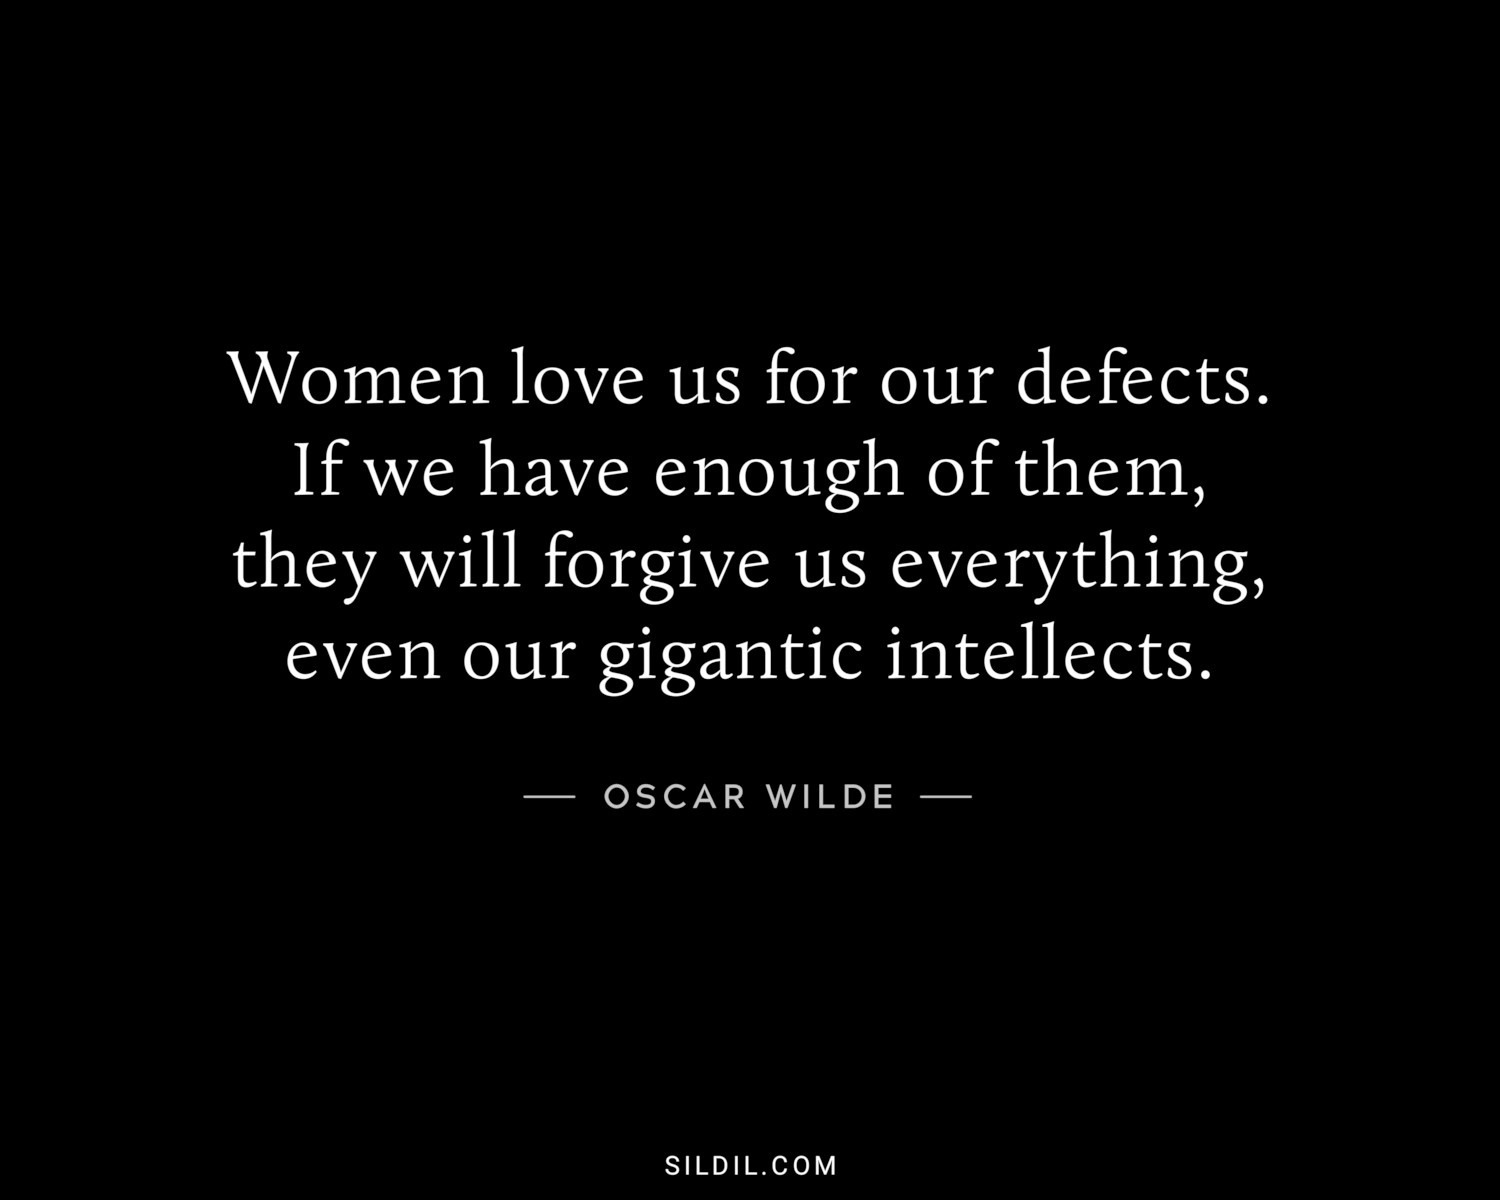 Women love us for our defects. If we have enough of them, they will forgive us everything, even our gigantic intellects.